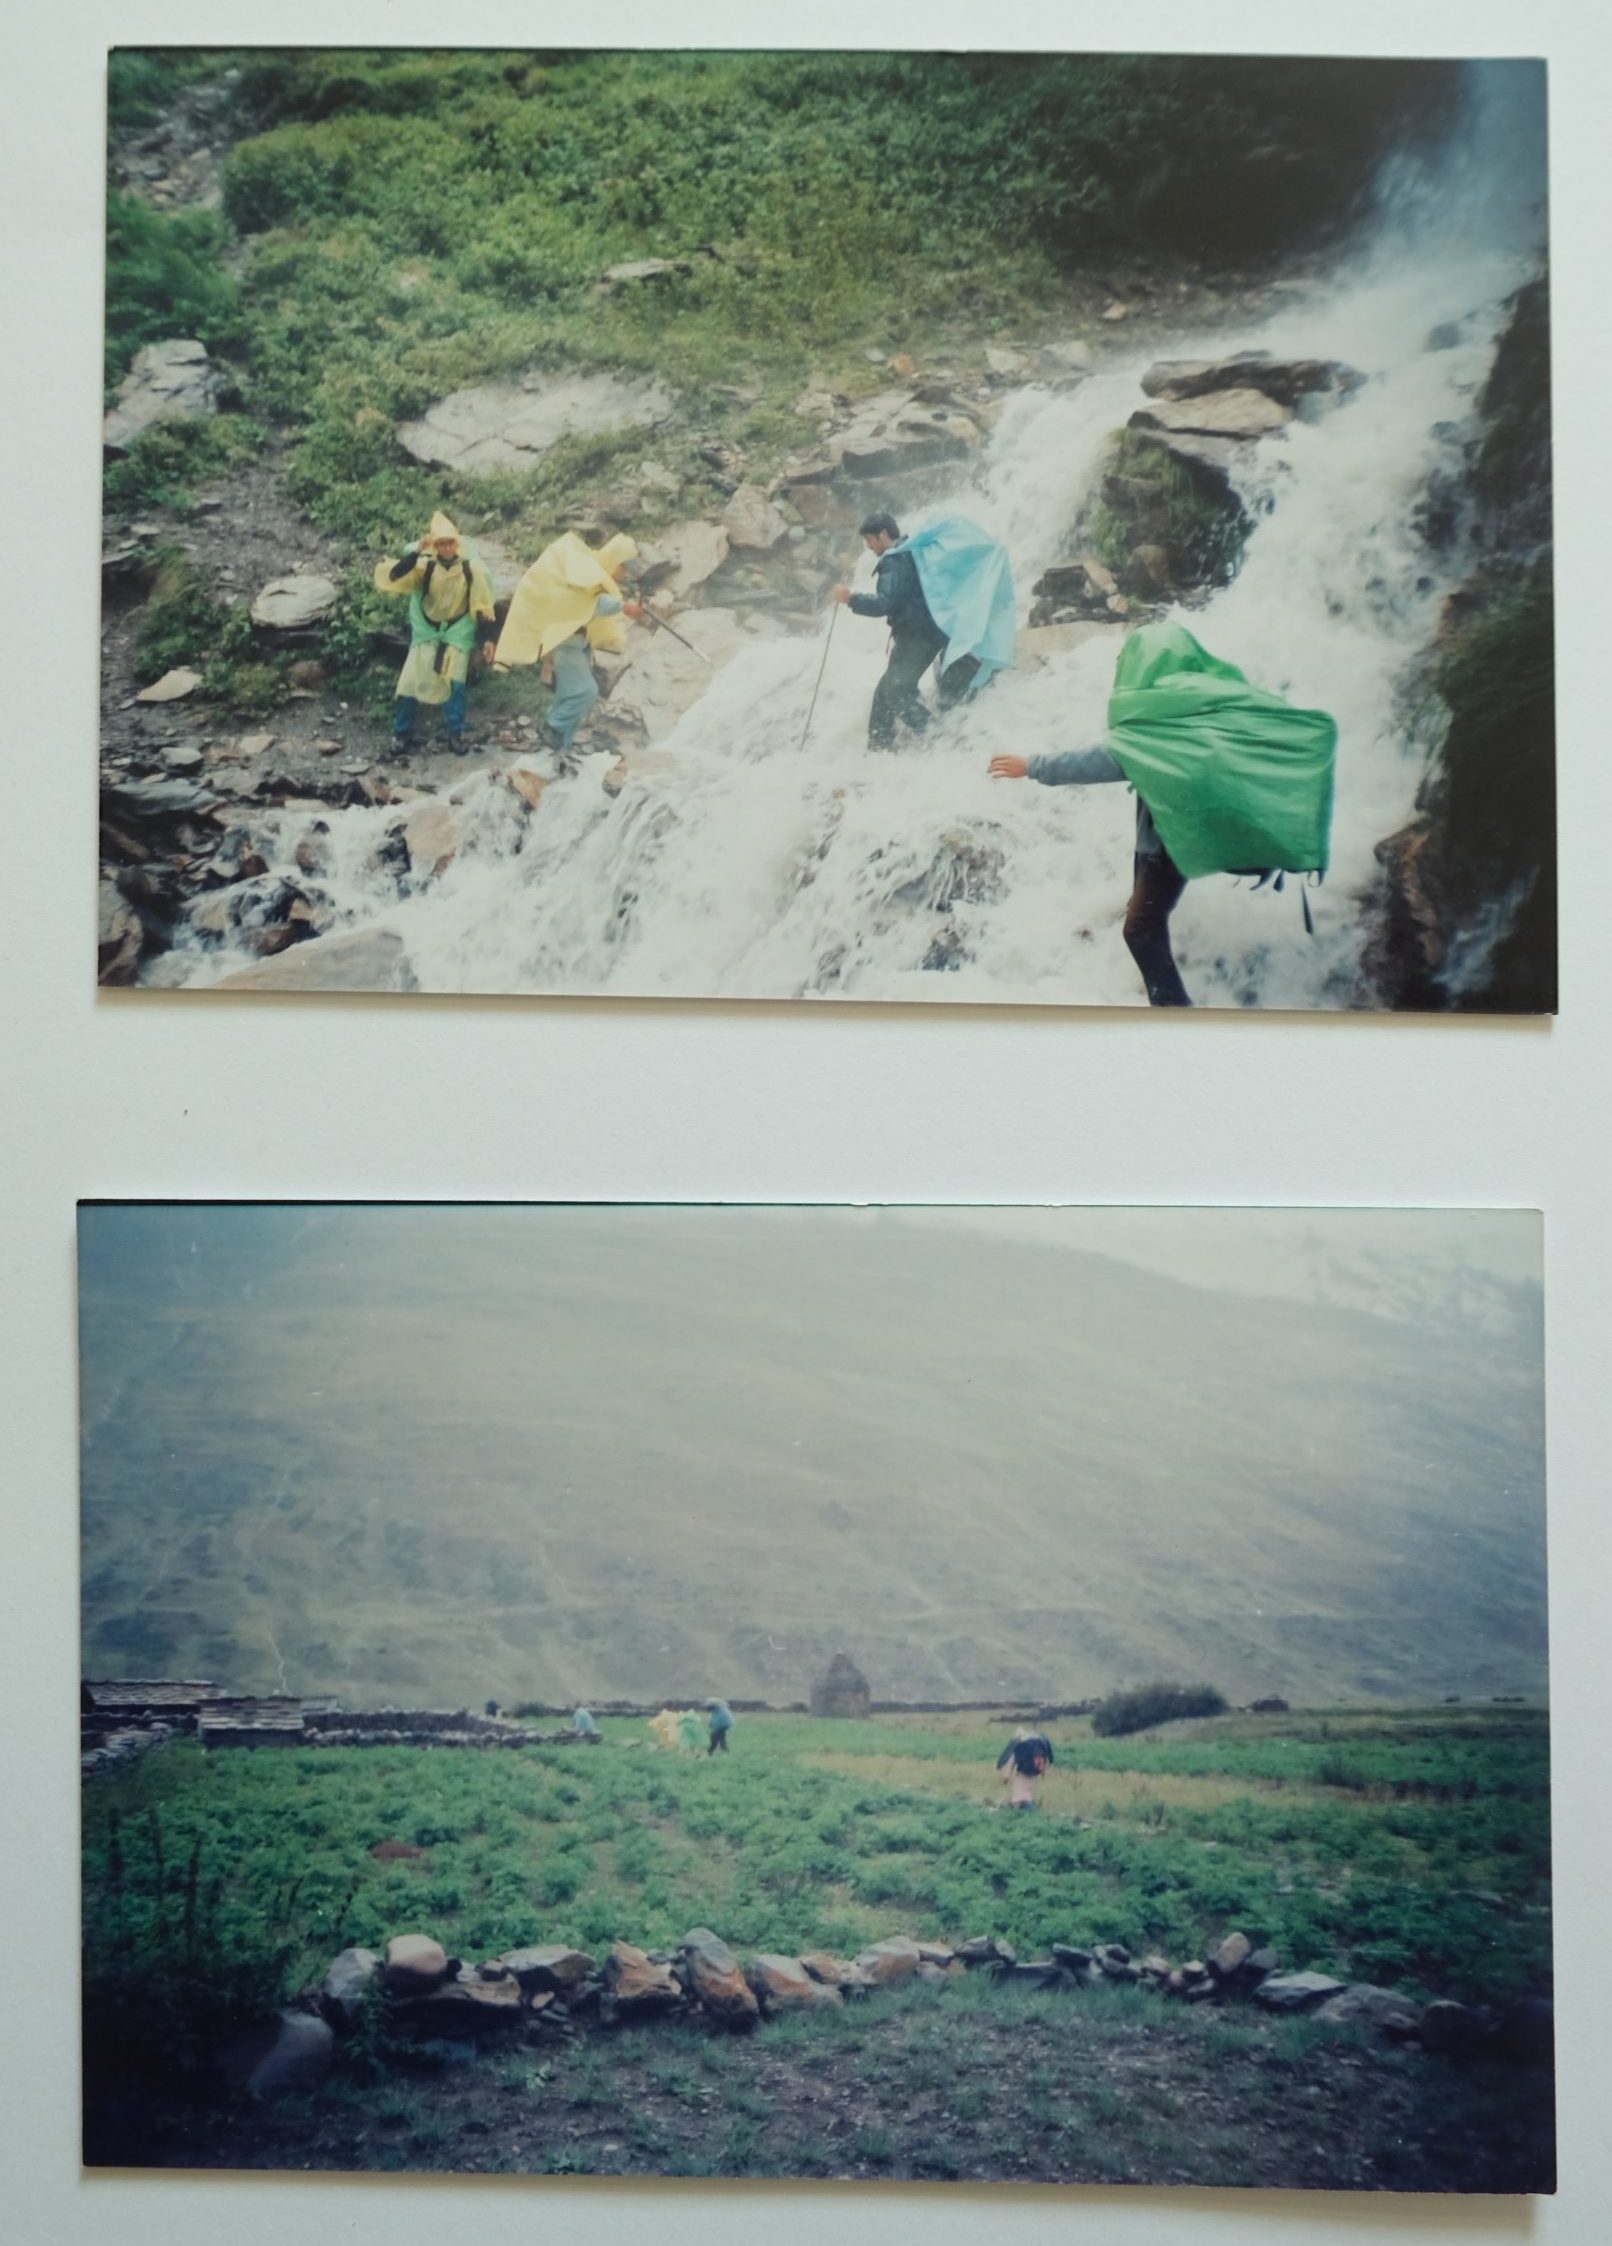 Photographs of people travelling through fields in the Johar Valley in June 2001 on the way to Milam